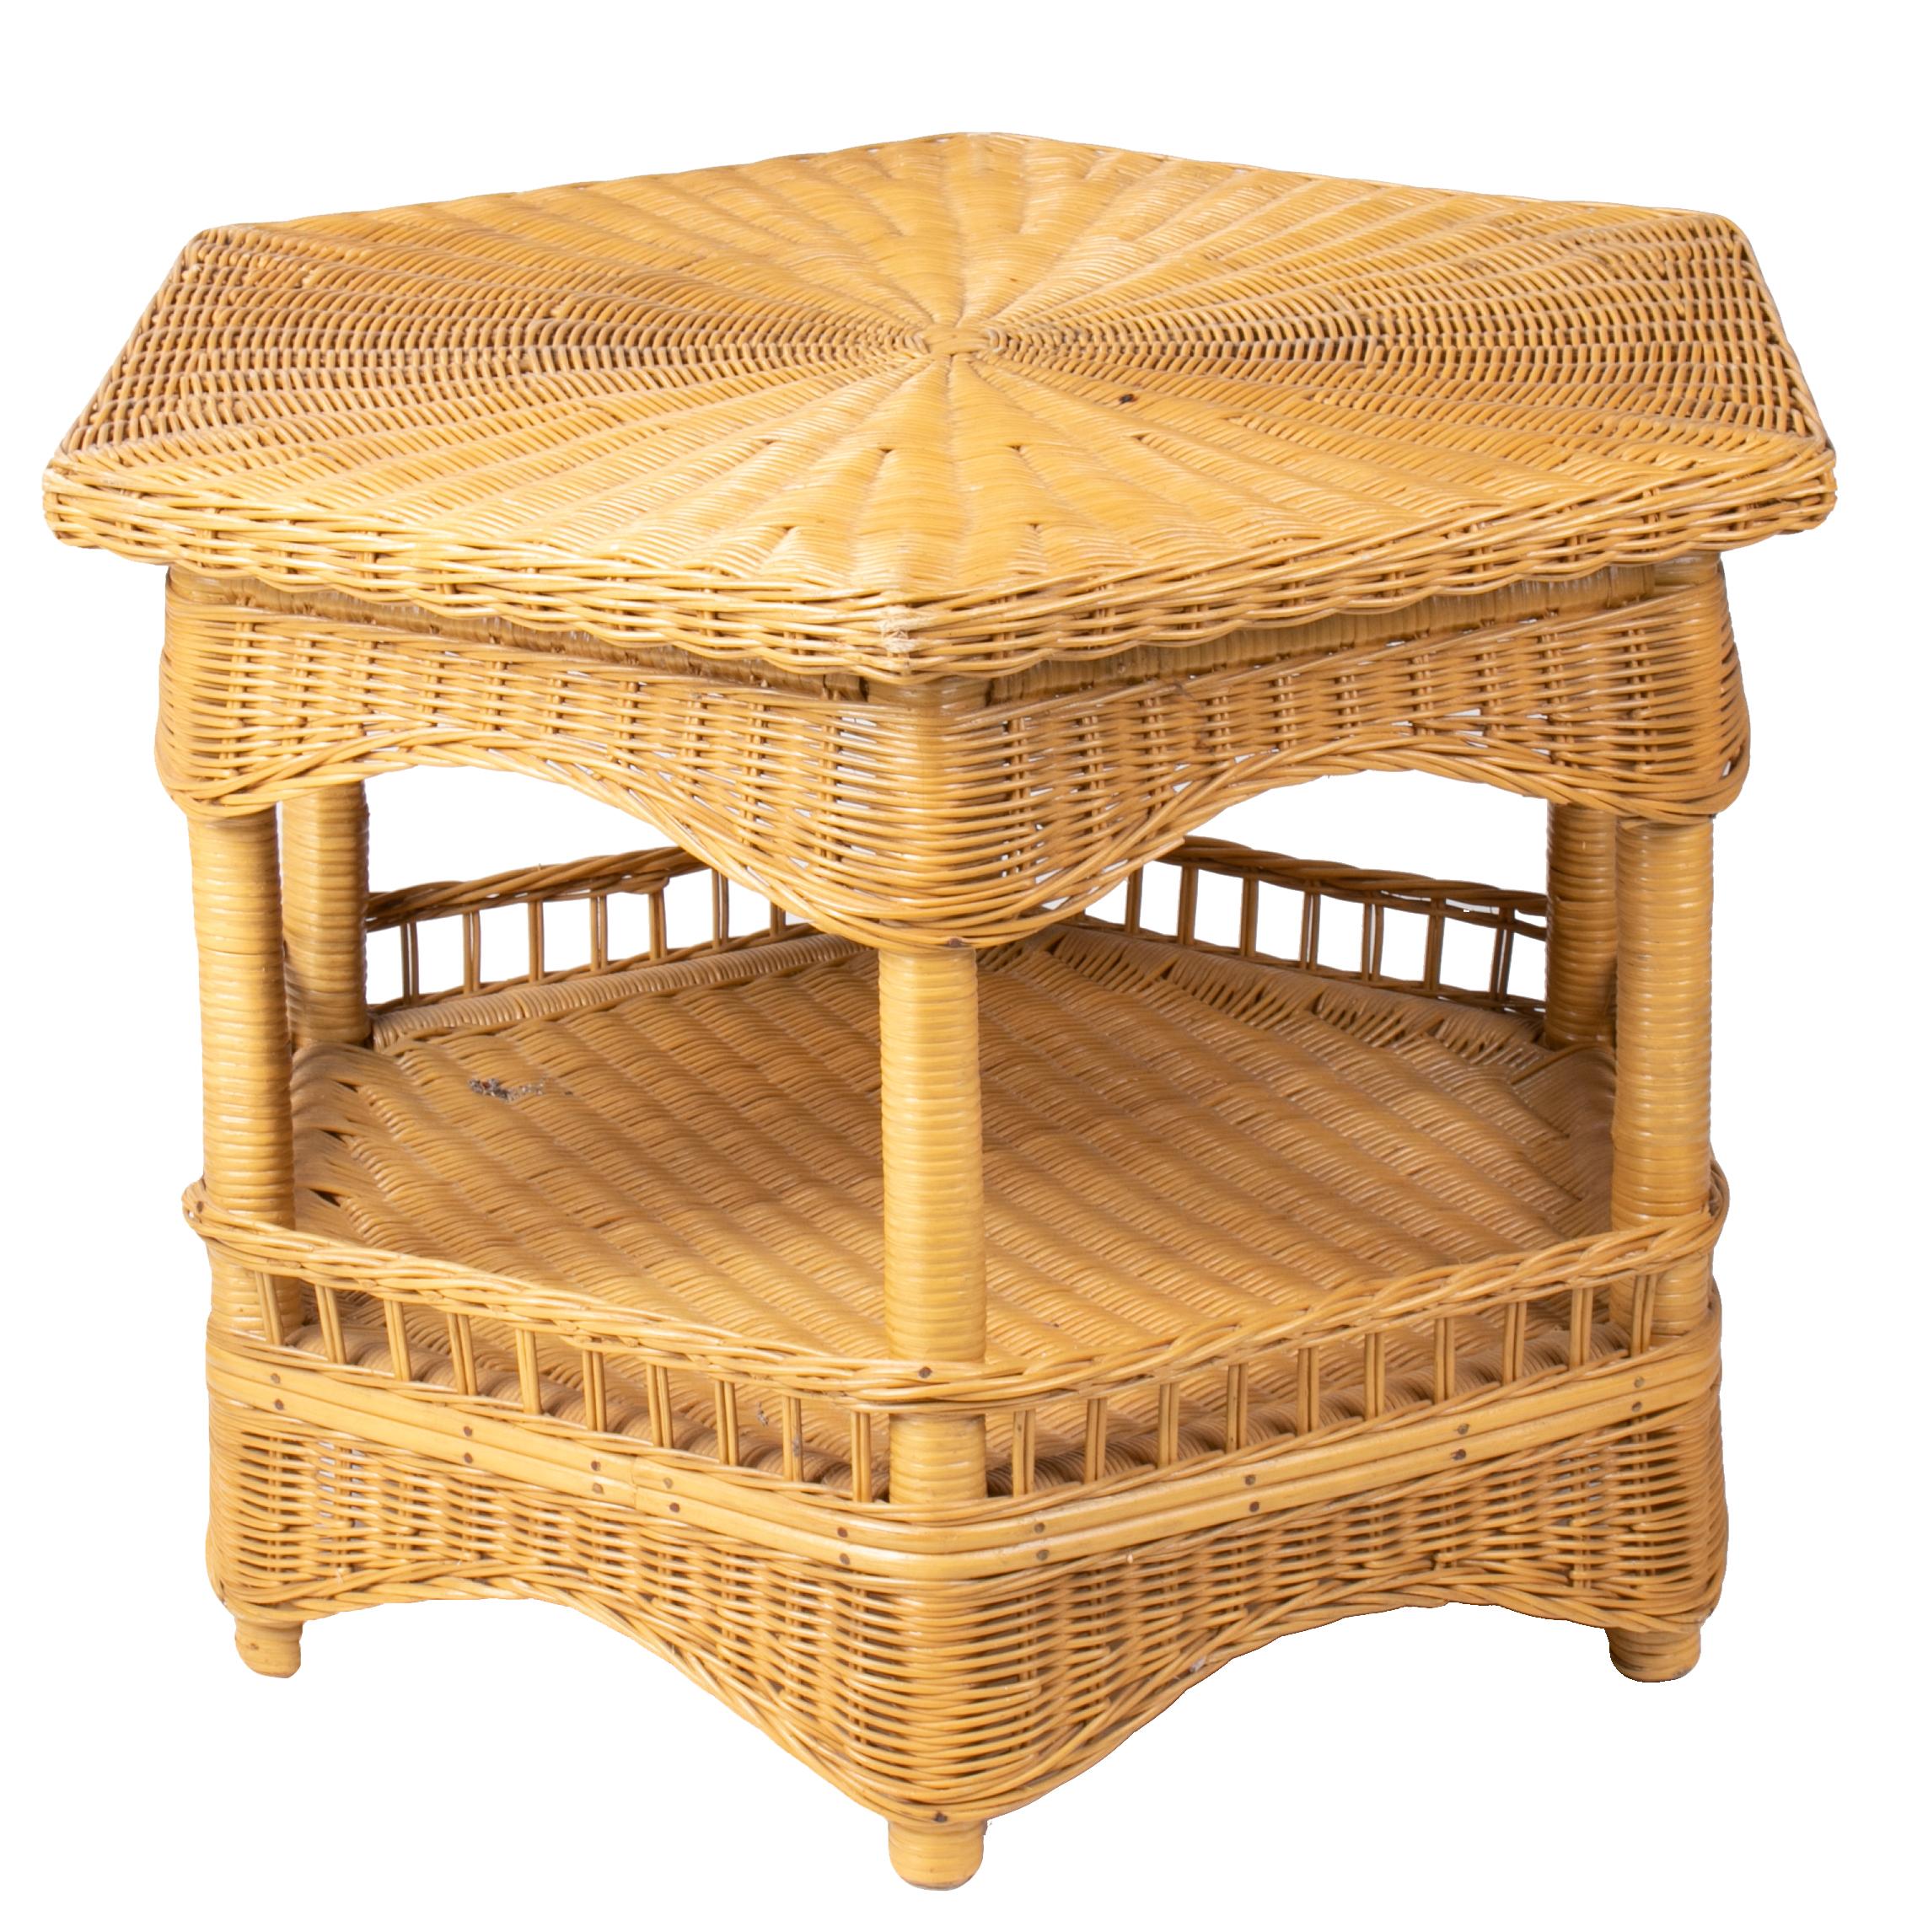 1980s Spanish hexagonal wicker auxiliary table hand woven over a wooden frame.